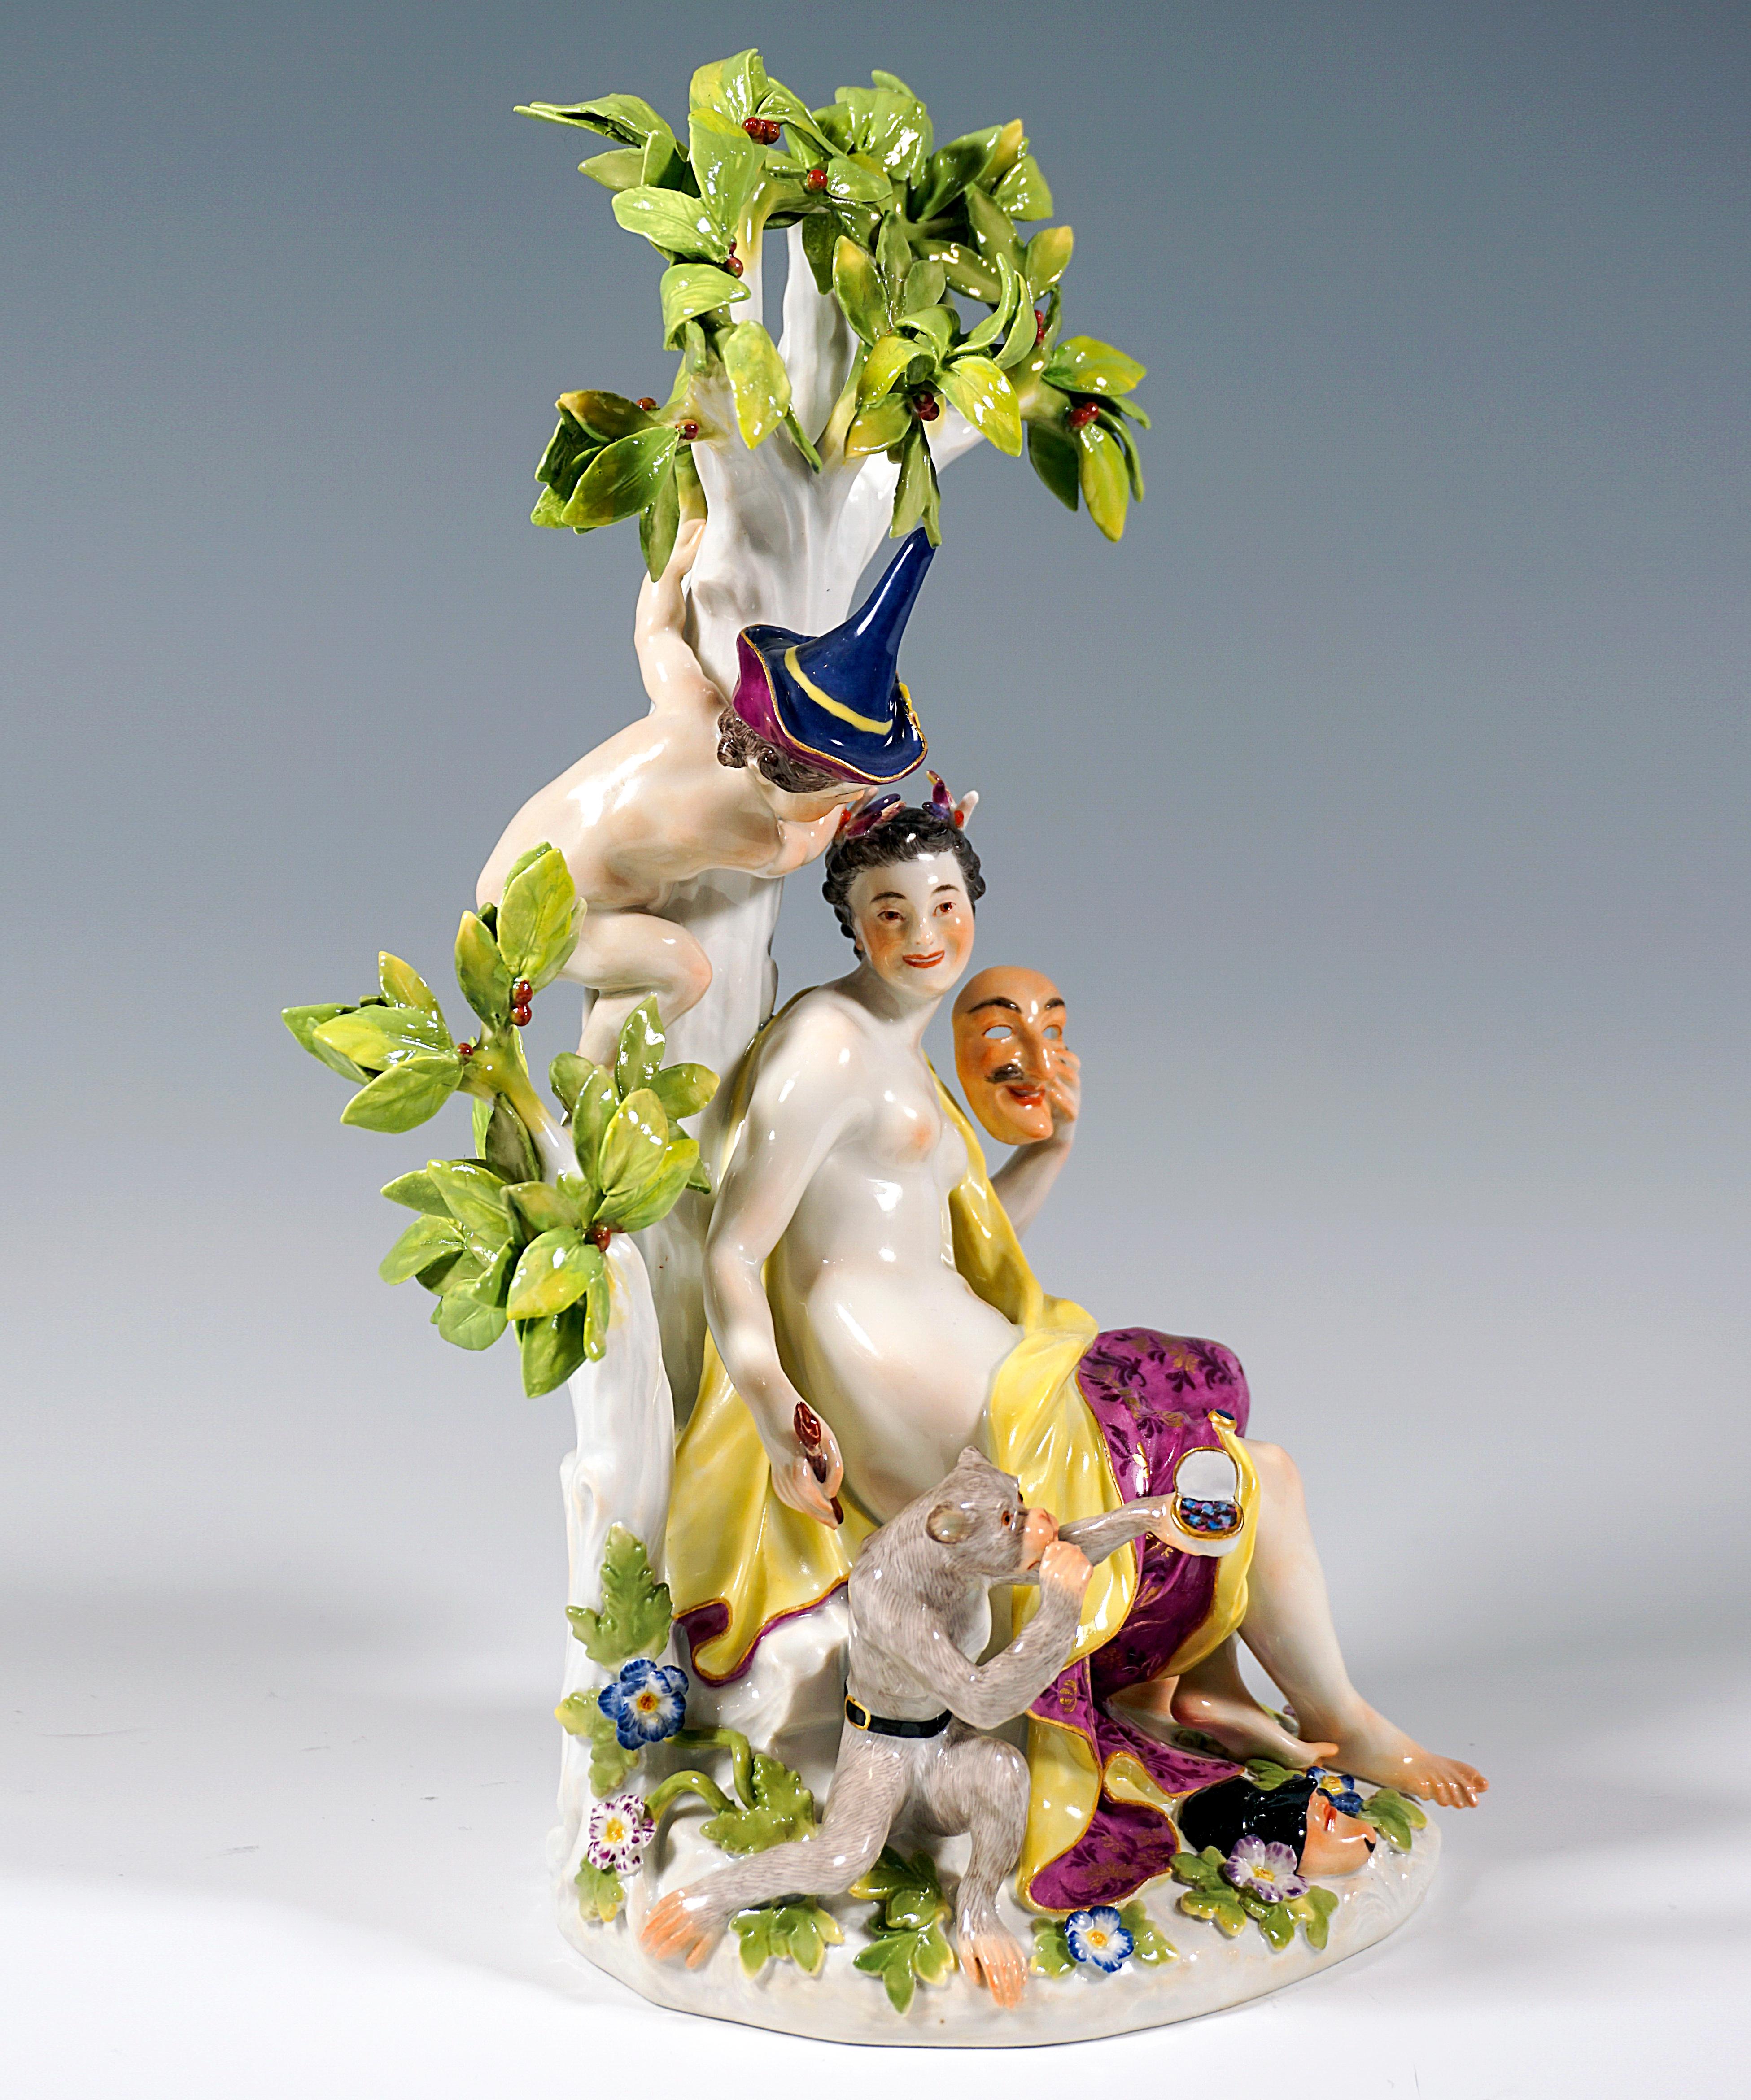 Very rare Meissen group:
Thalia, the muse of theater and comic poetry, covered only with a large cloth, smiling and sitting on a rock under a cherry tree, holding a mask next to her face in her left hand, a paintbrush in her right, other comic